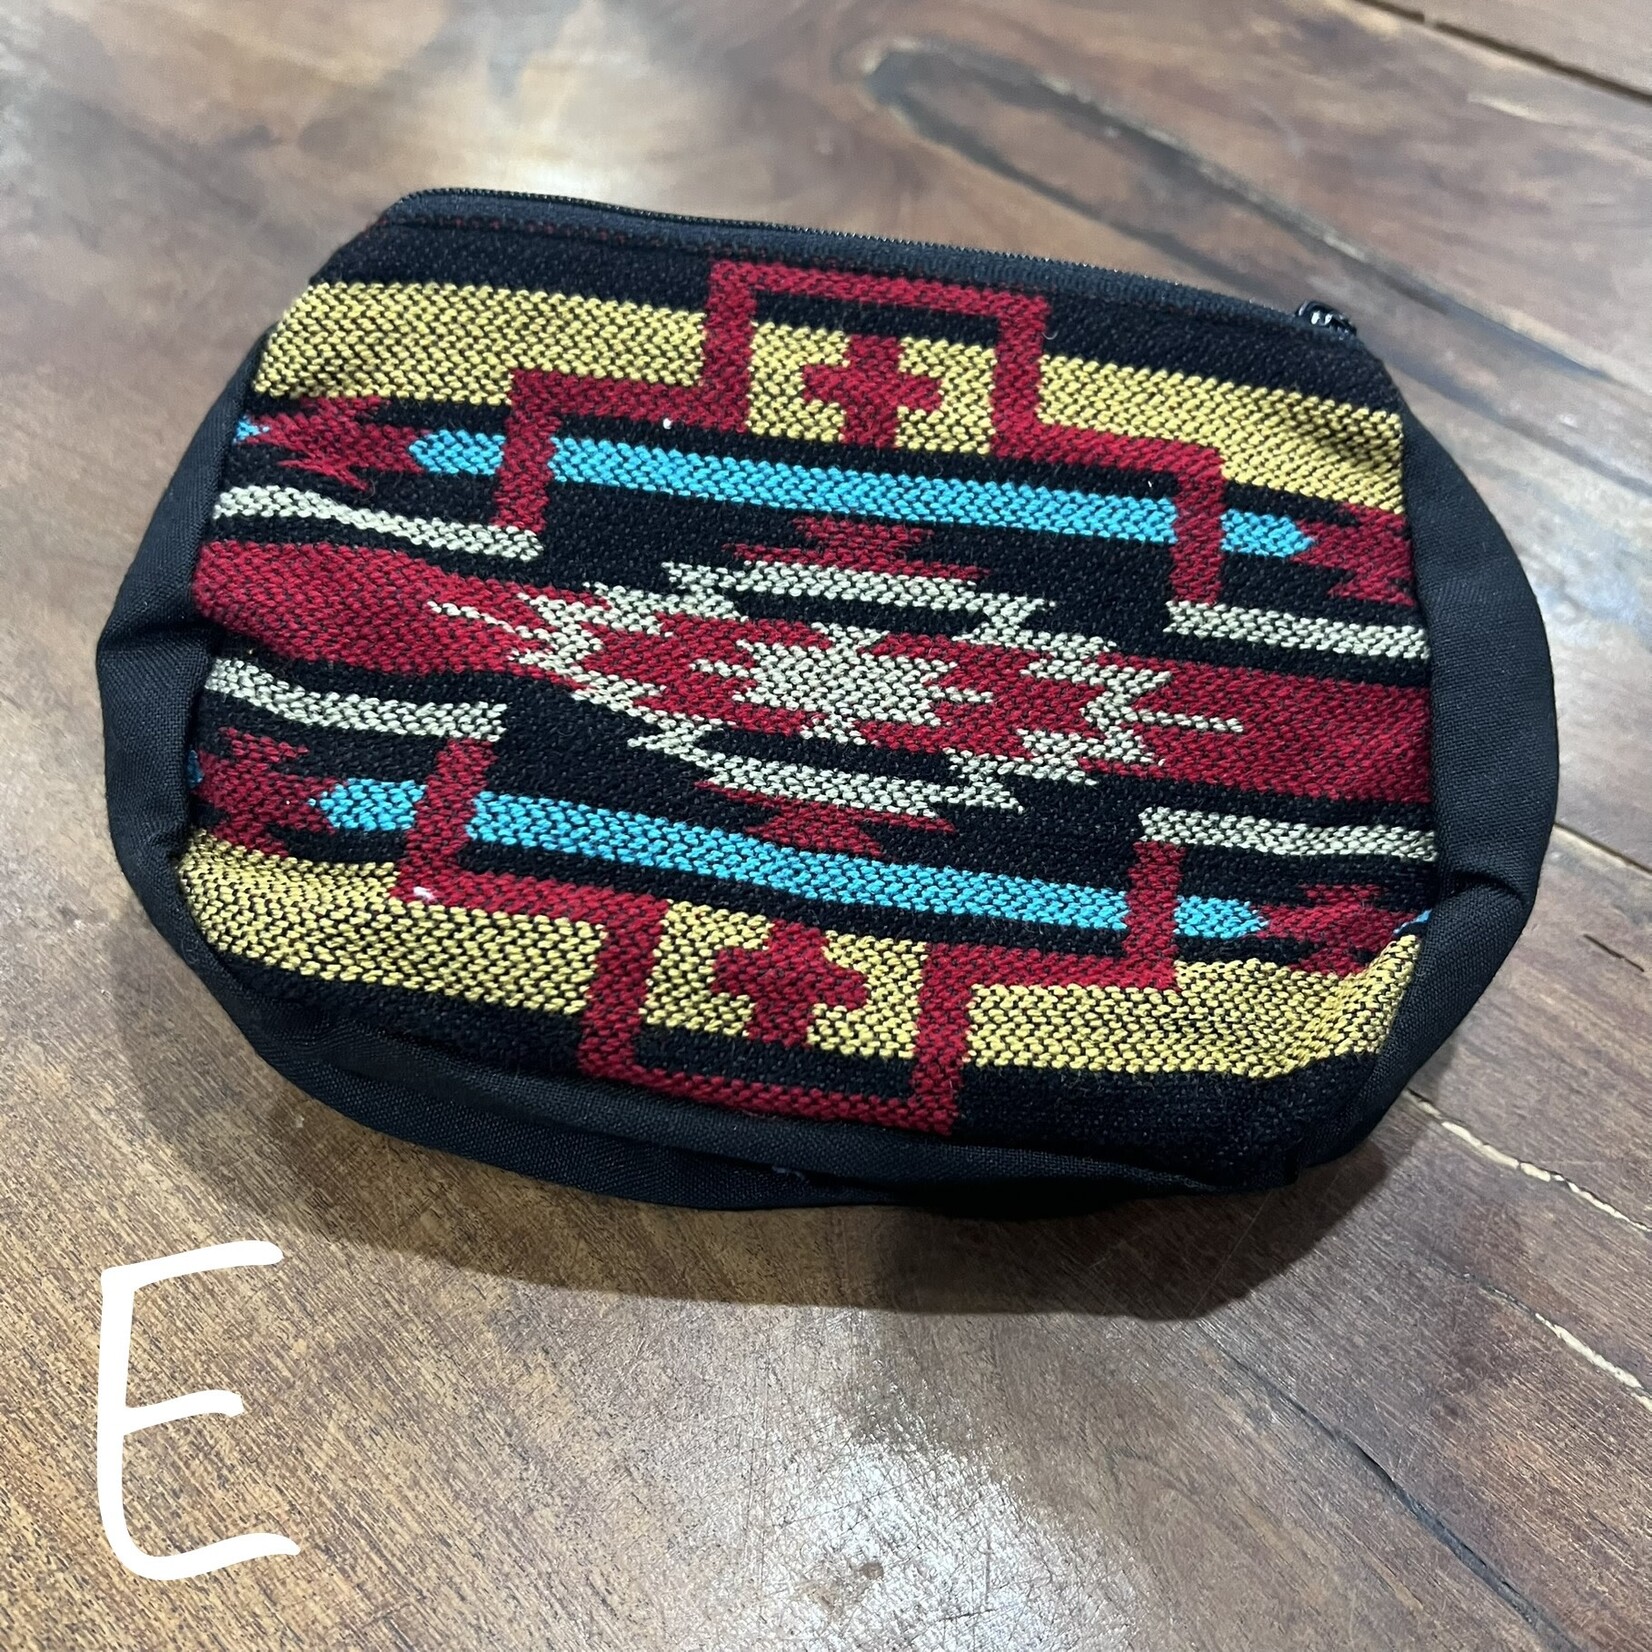 Small Southwest Cosmetic Bag (5"x7")